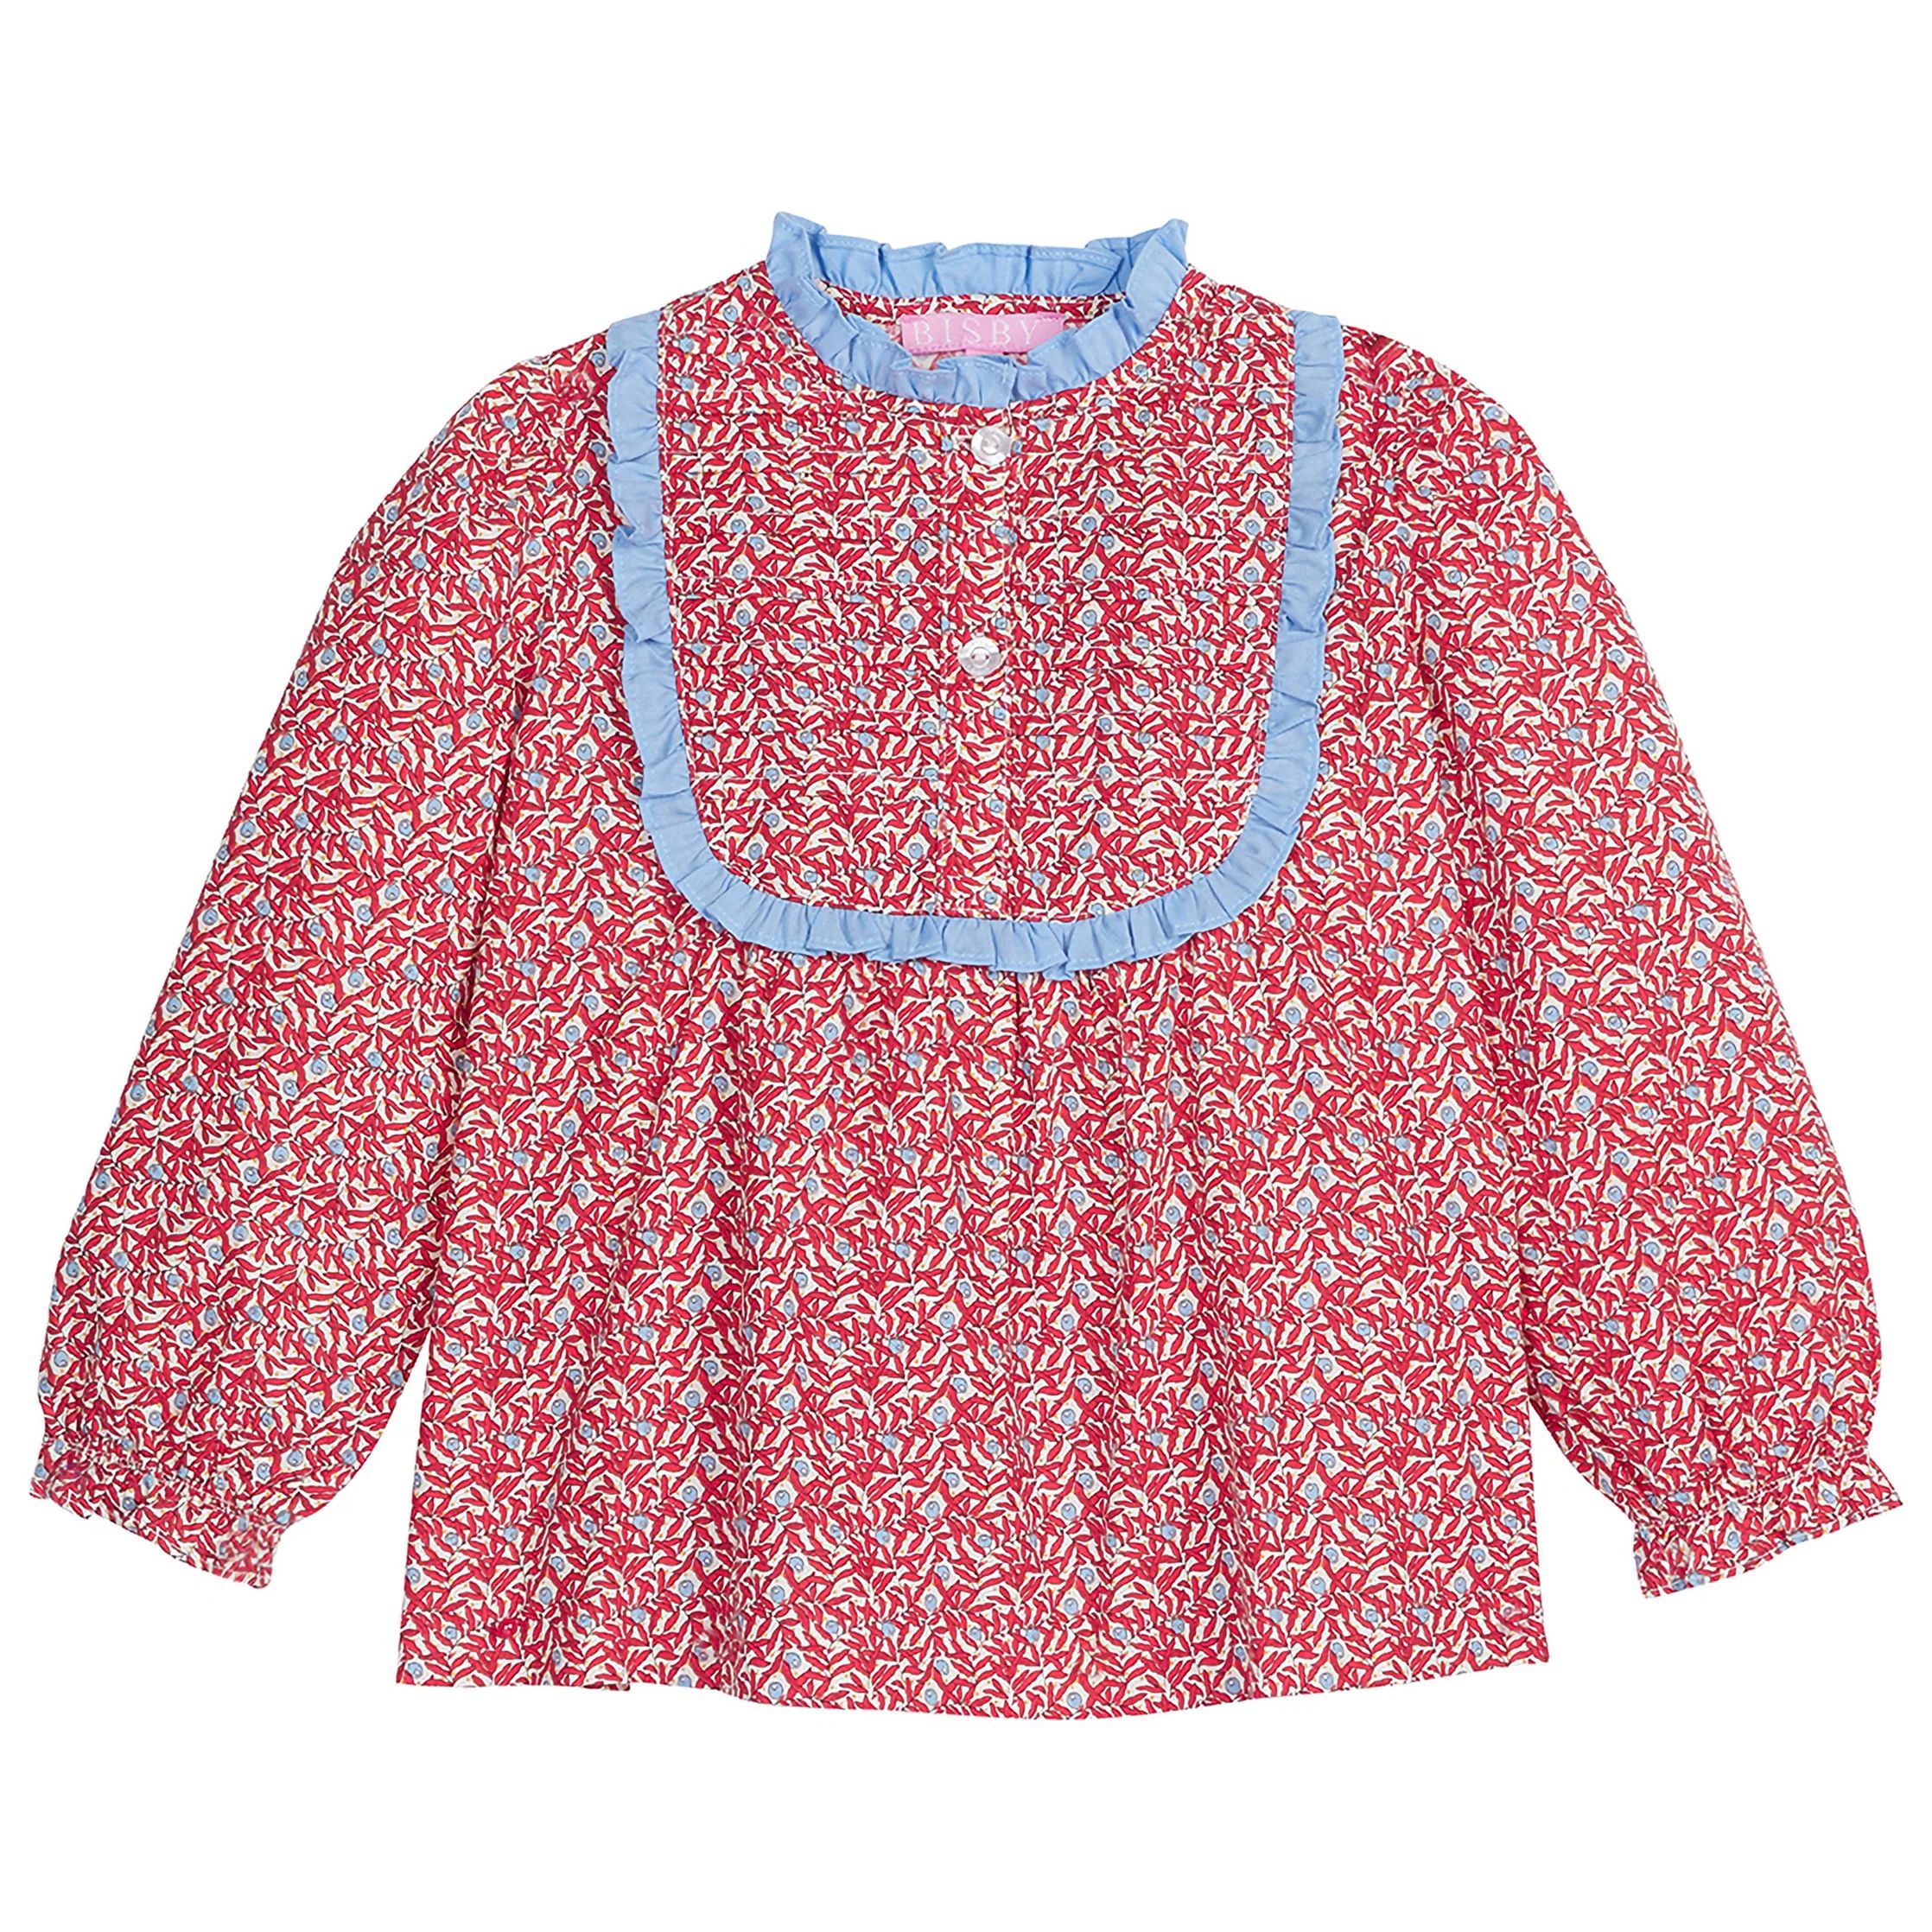 Chelsea Top - Winterberry Red | BISBY Kids